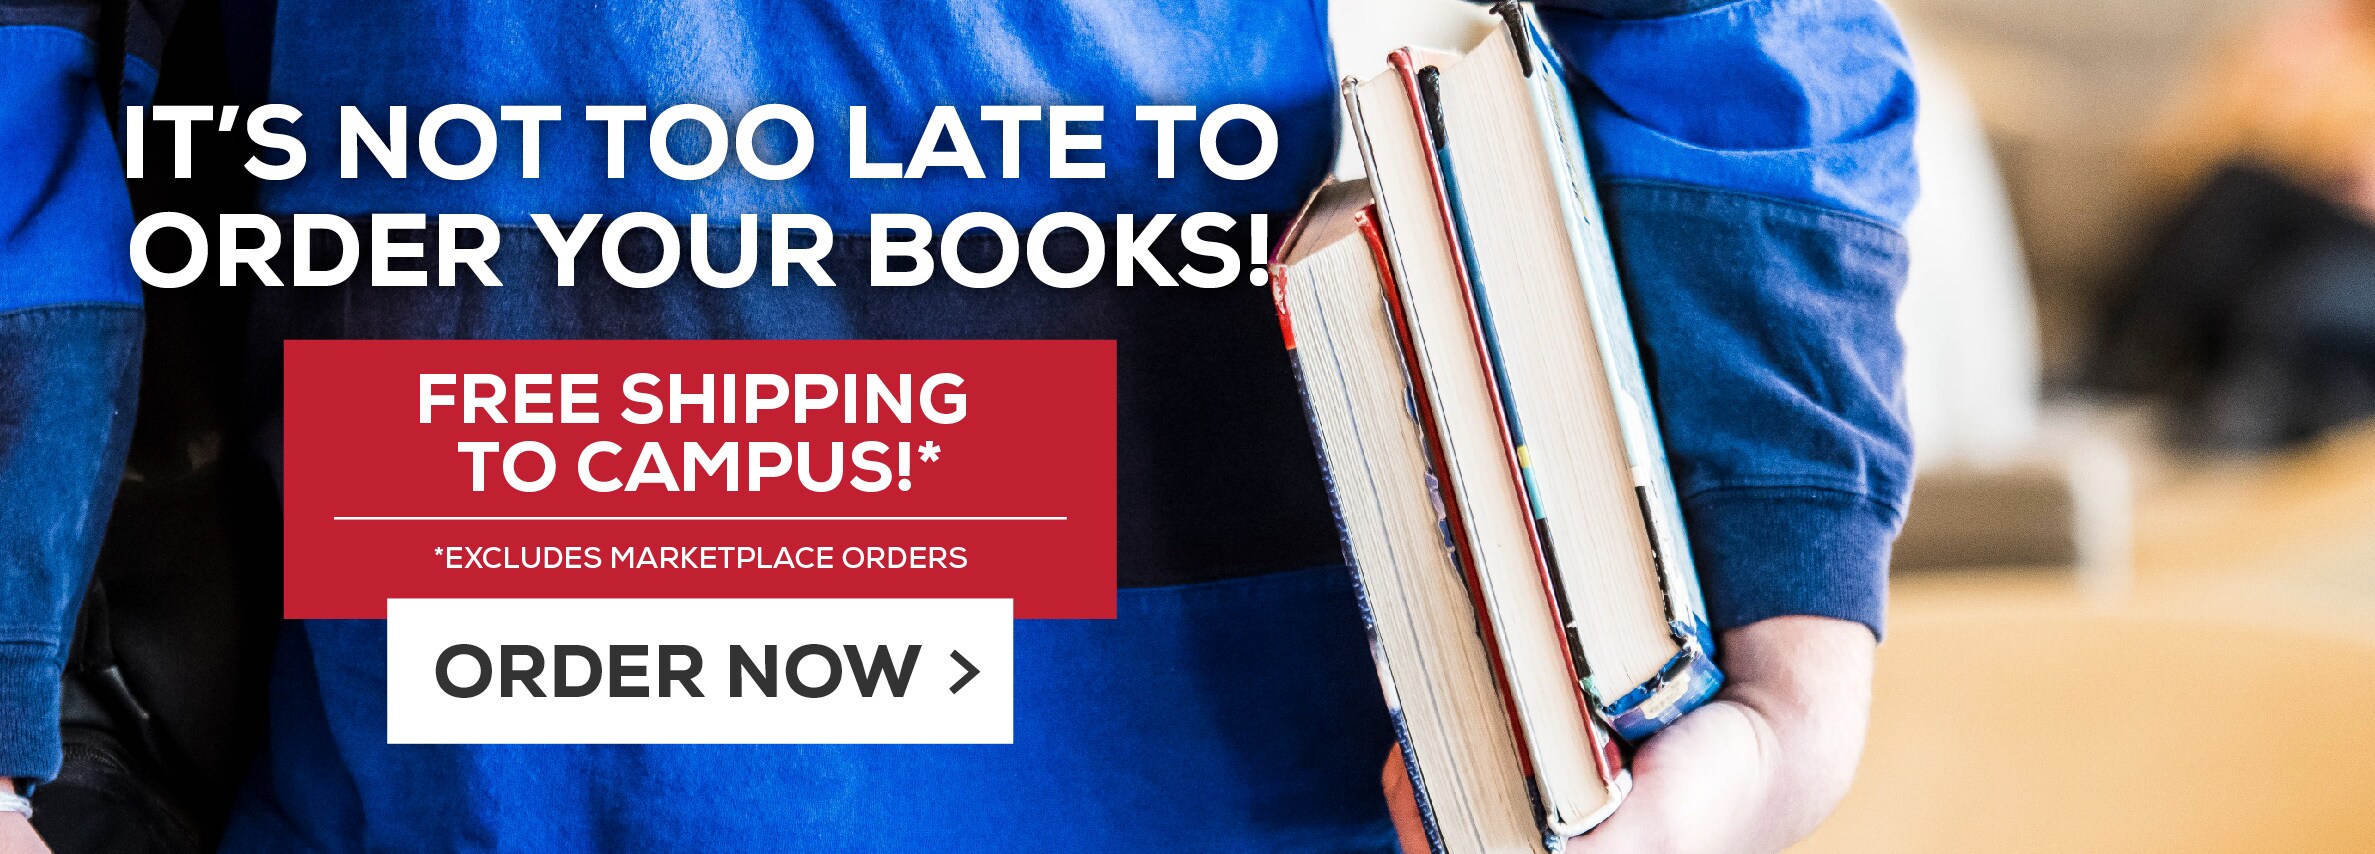 Itâ€™s not too late to order your books! Free shipping to campus!* Excludes marketplace purchases. Order Now.